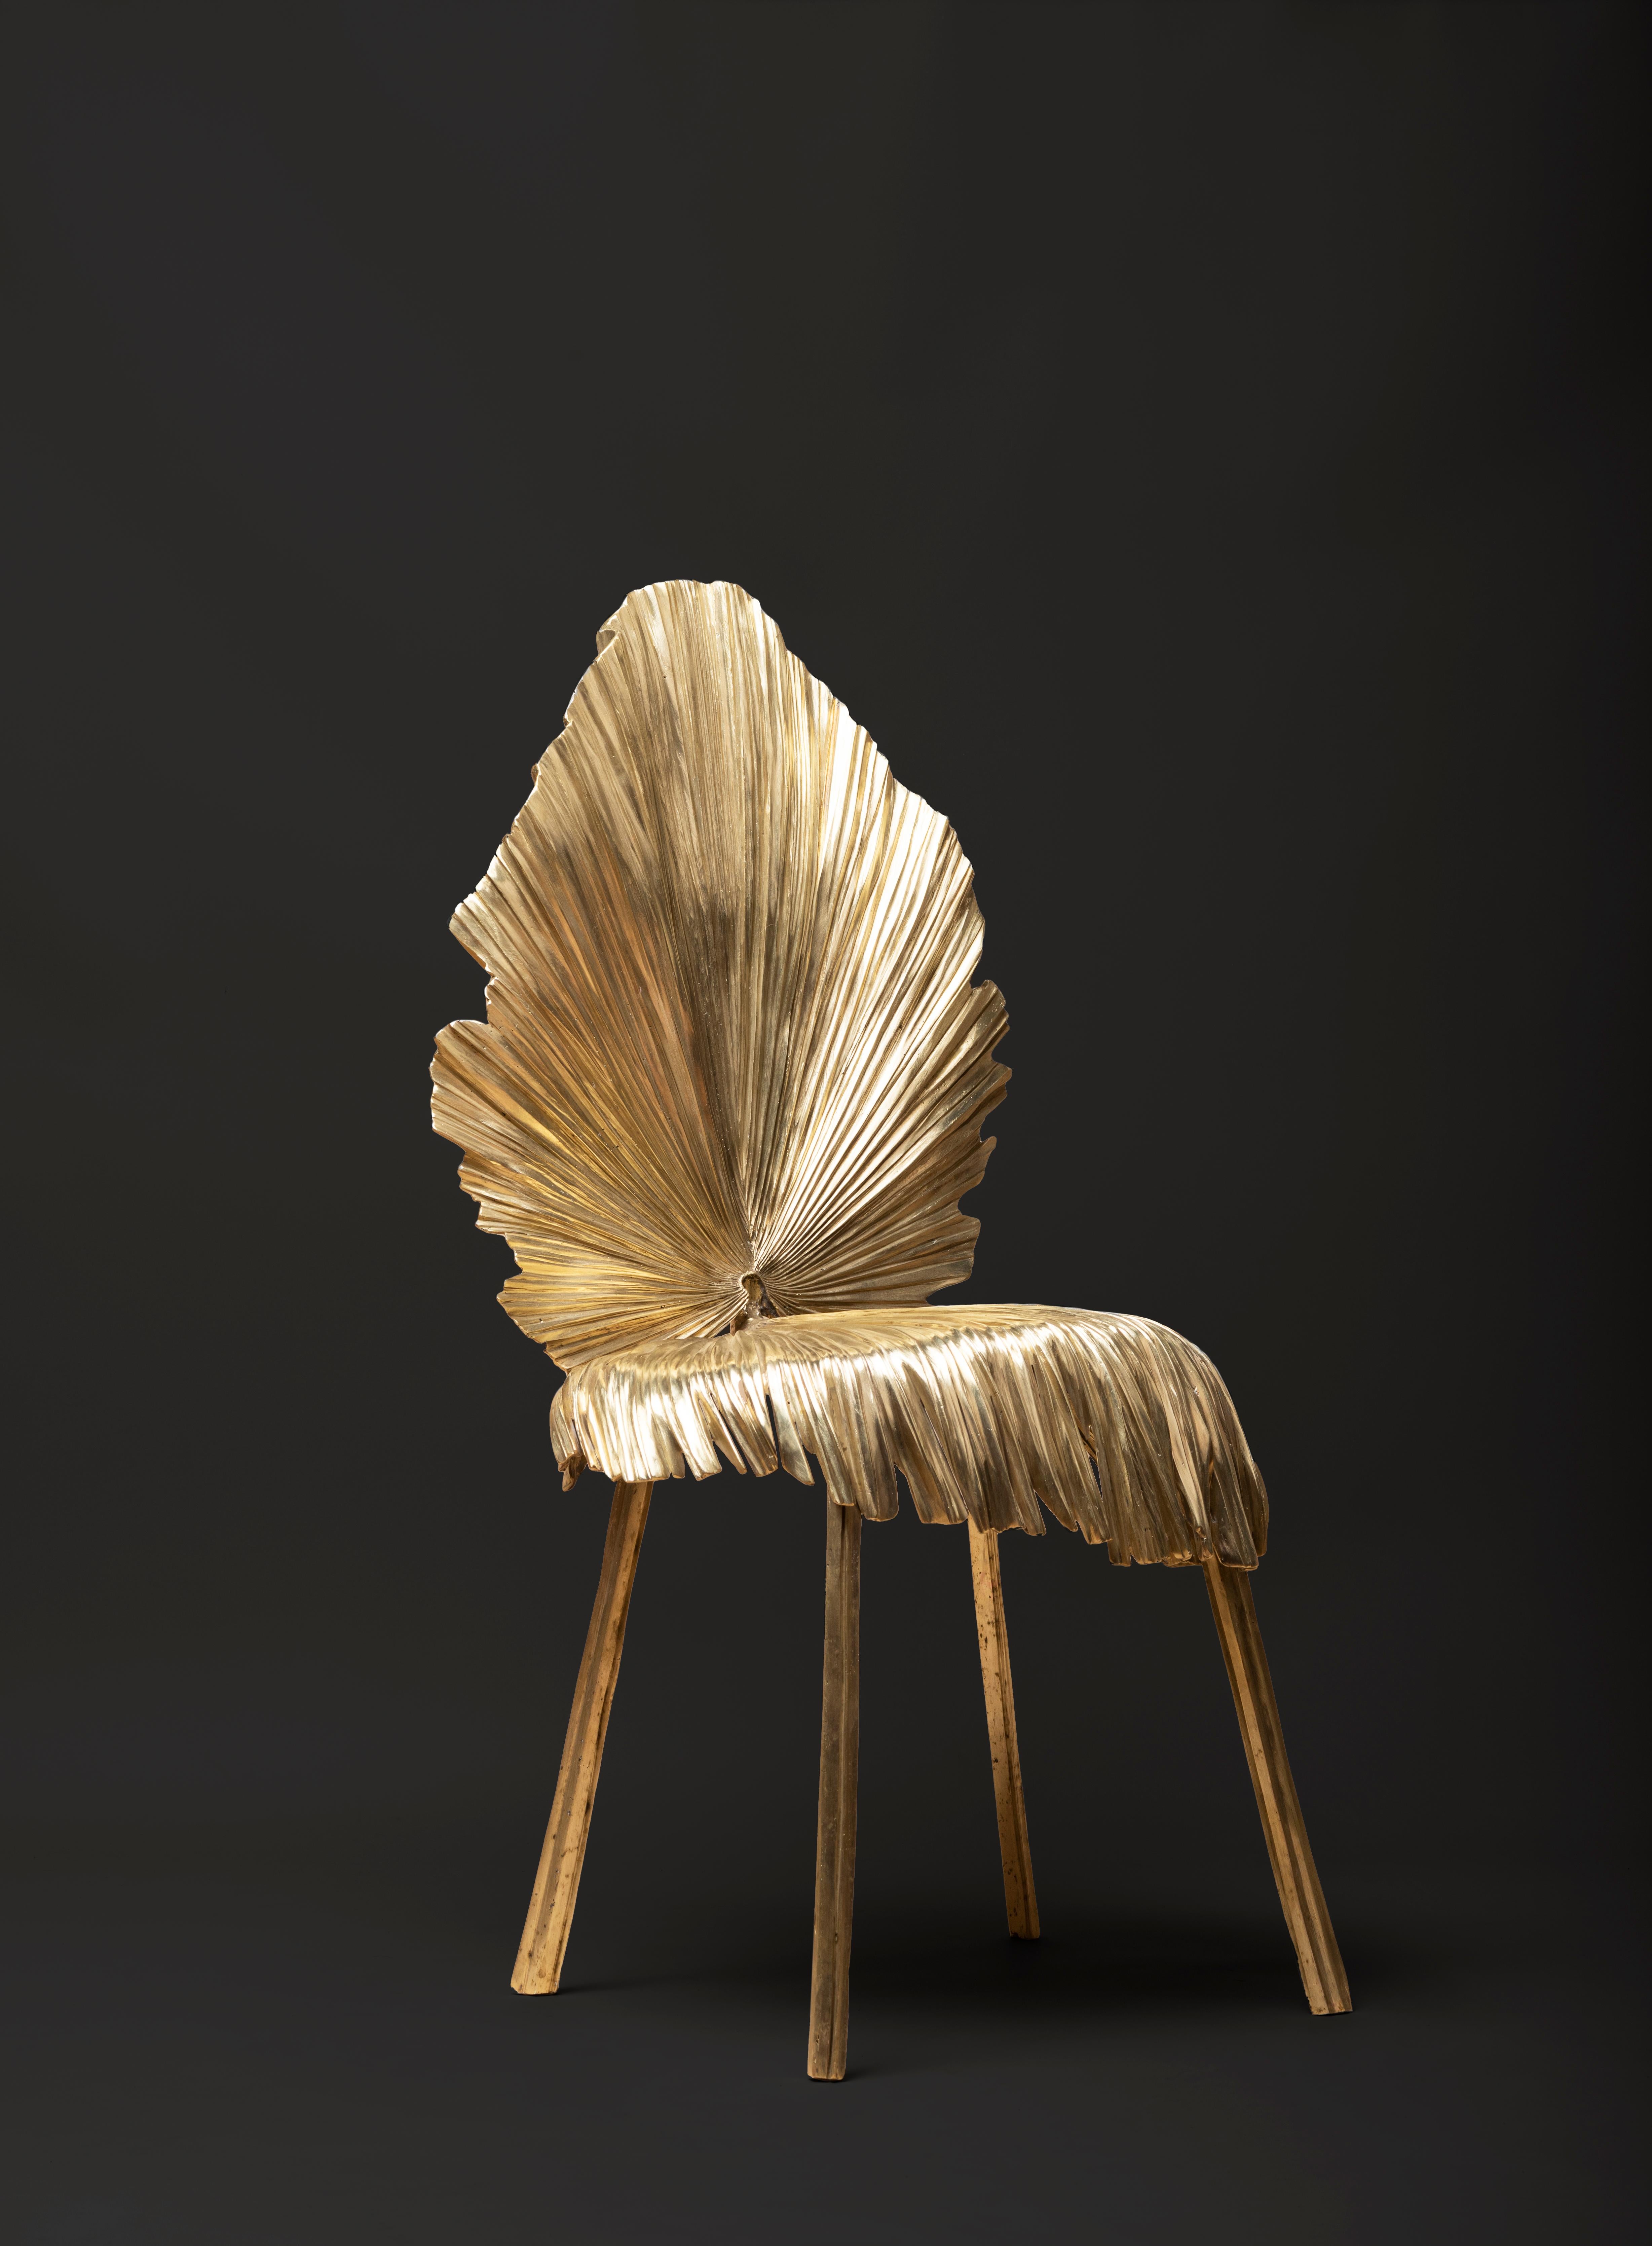 The Palma chair / Silla Palma

Casted from Latania lontaroides Palm leaves, dried and carefuly formed to create the quasi-im- mposible mold that gives birth to this piece. The Palma Chair explores the materialty and possibli- ties of the efimeral